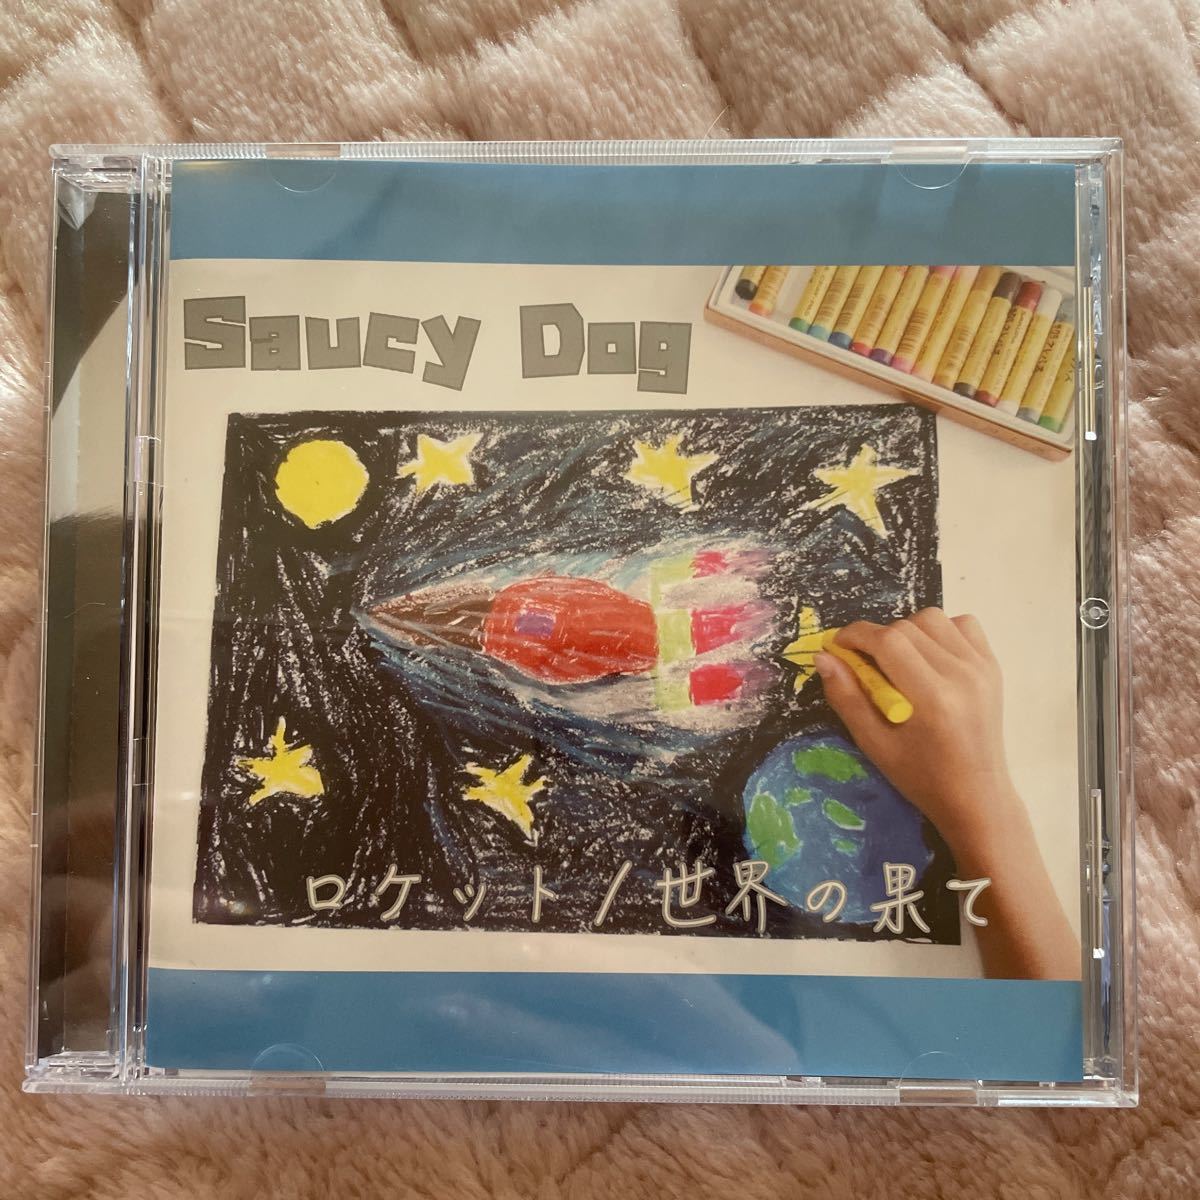 Saucy Dog ロケット / 世界の果て